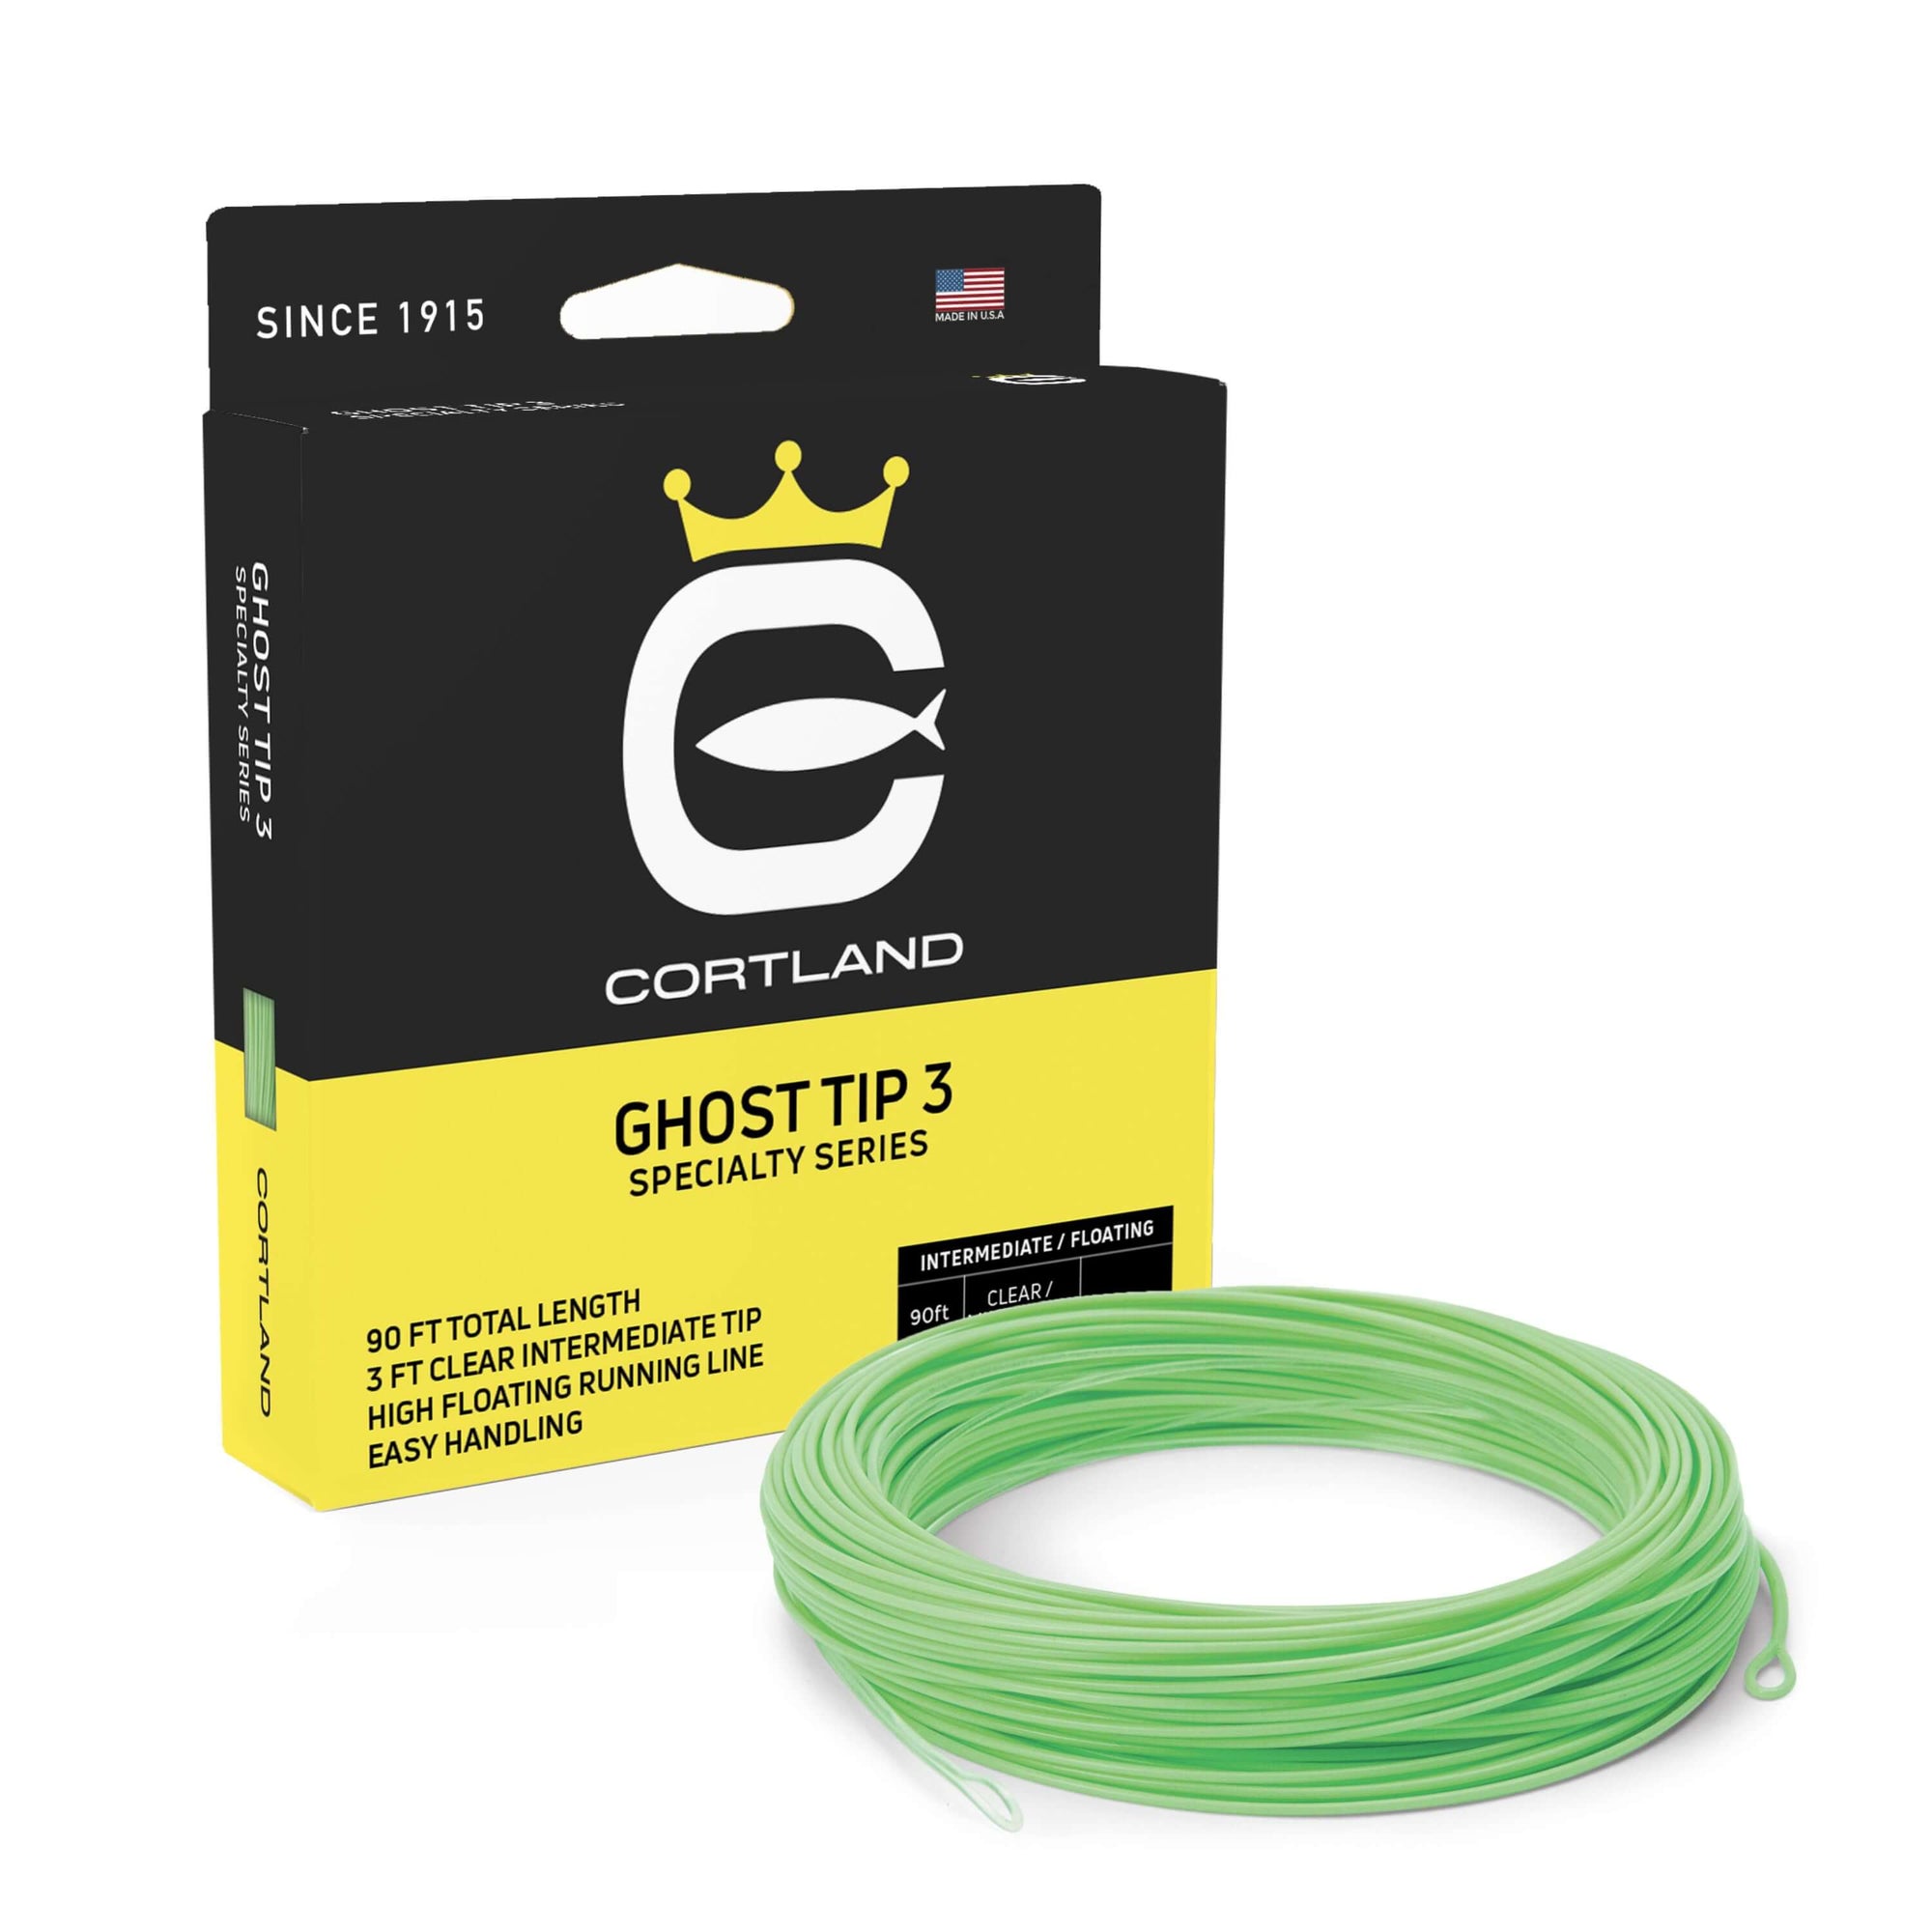 Ghost Tip 3 Fly Line and Box. The line is clear and mint green. The box is black and yellow. 